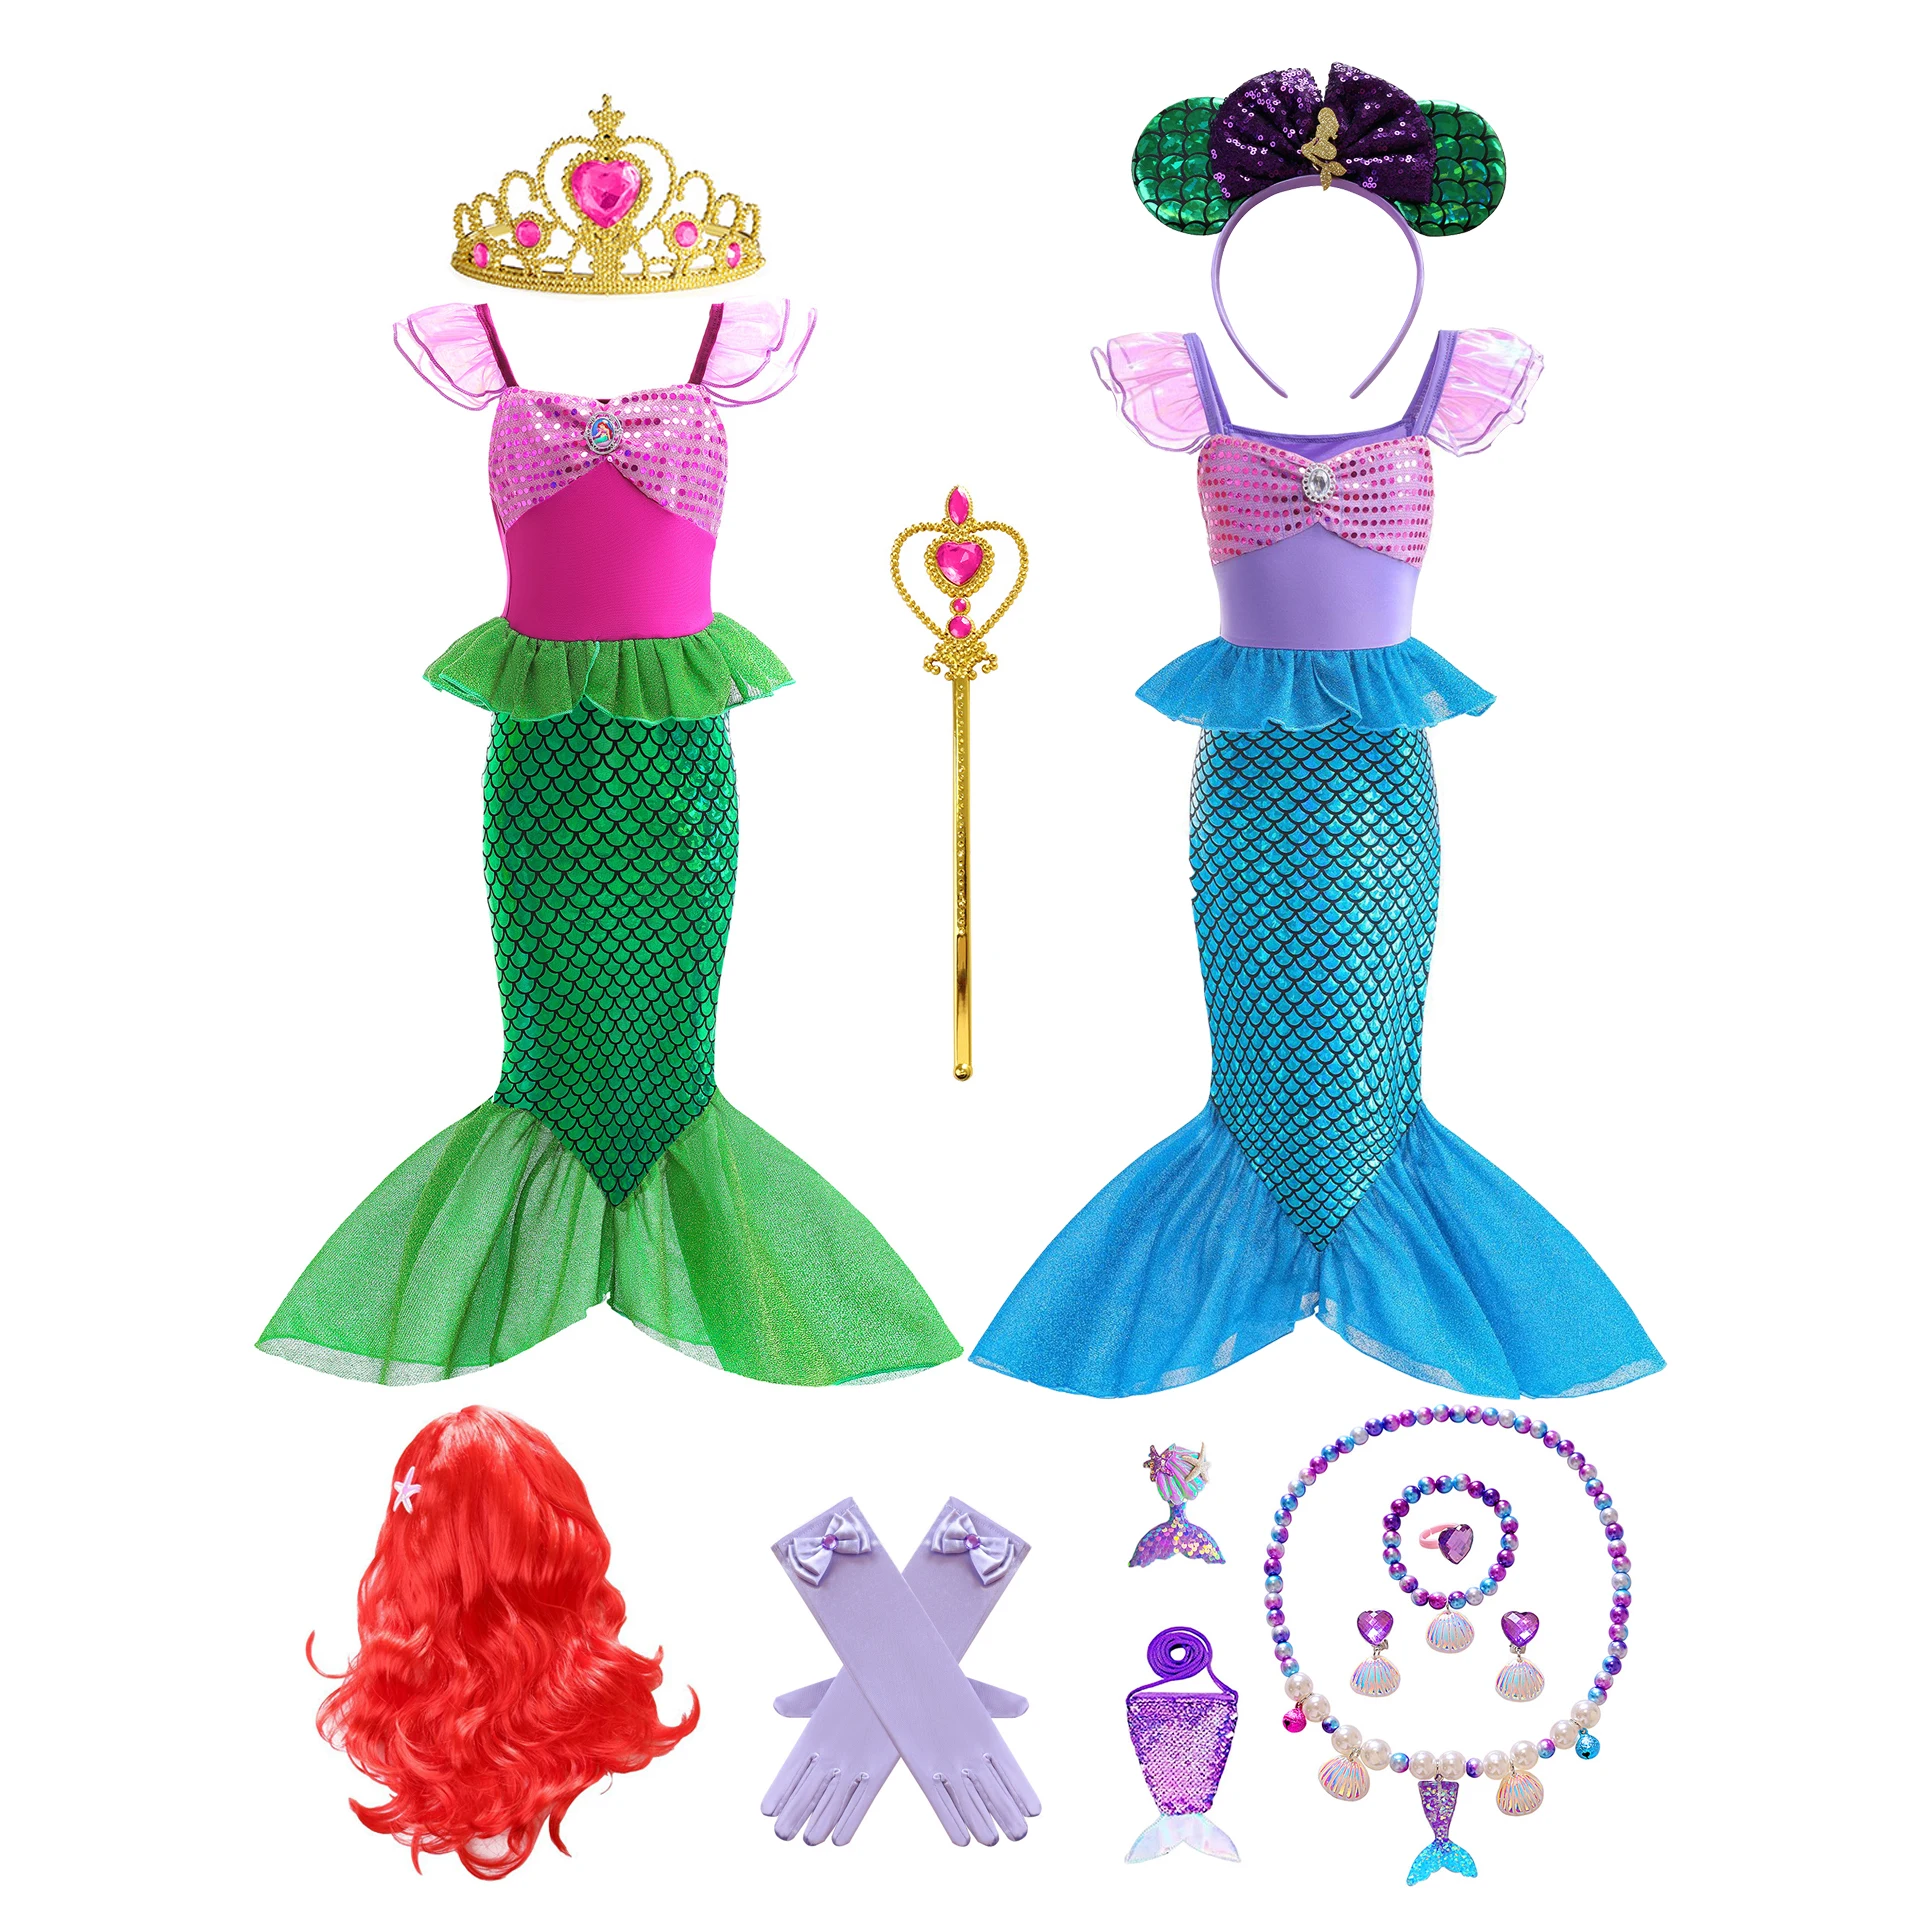 

Little Mermaid Costume for Girls Mermaid Dress for Ggirls Sequined Birthday Party Carnival Cosplay Kids Princess Costume